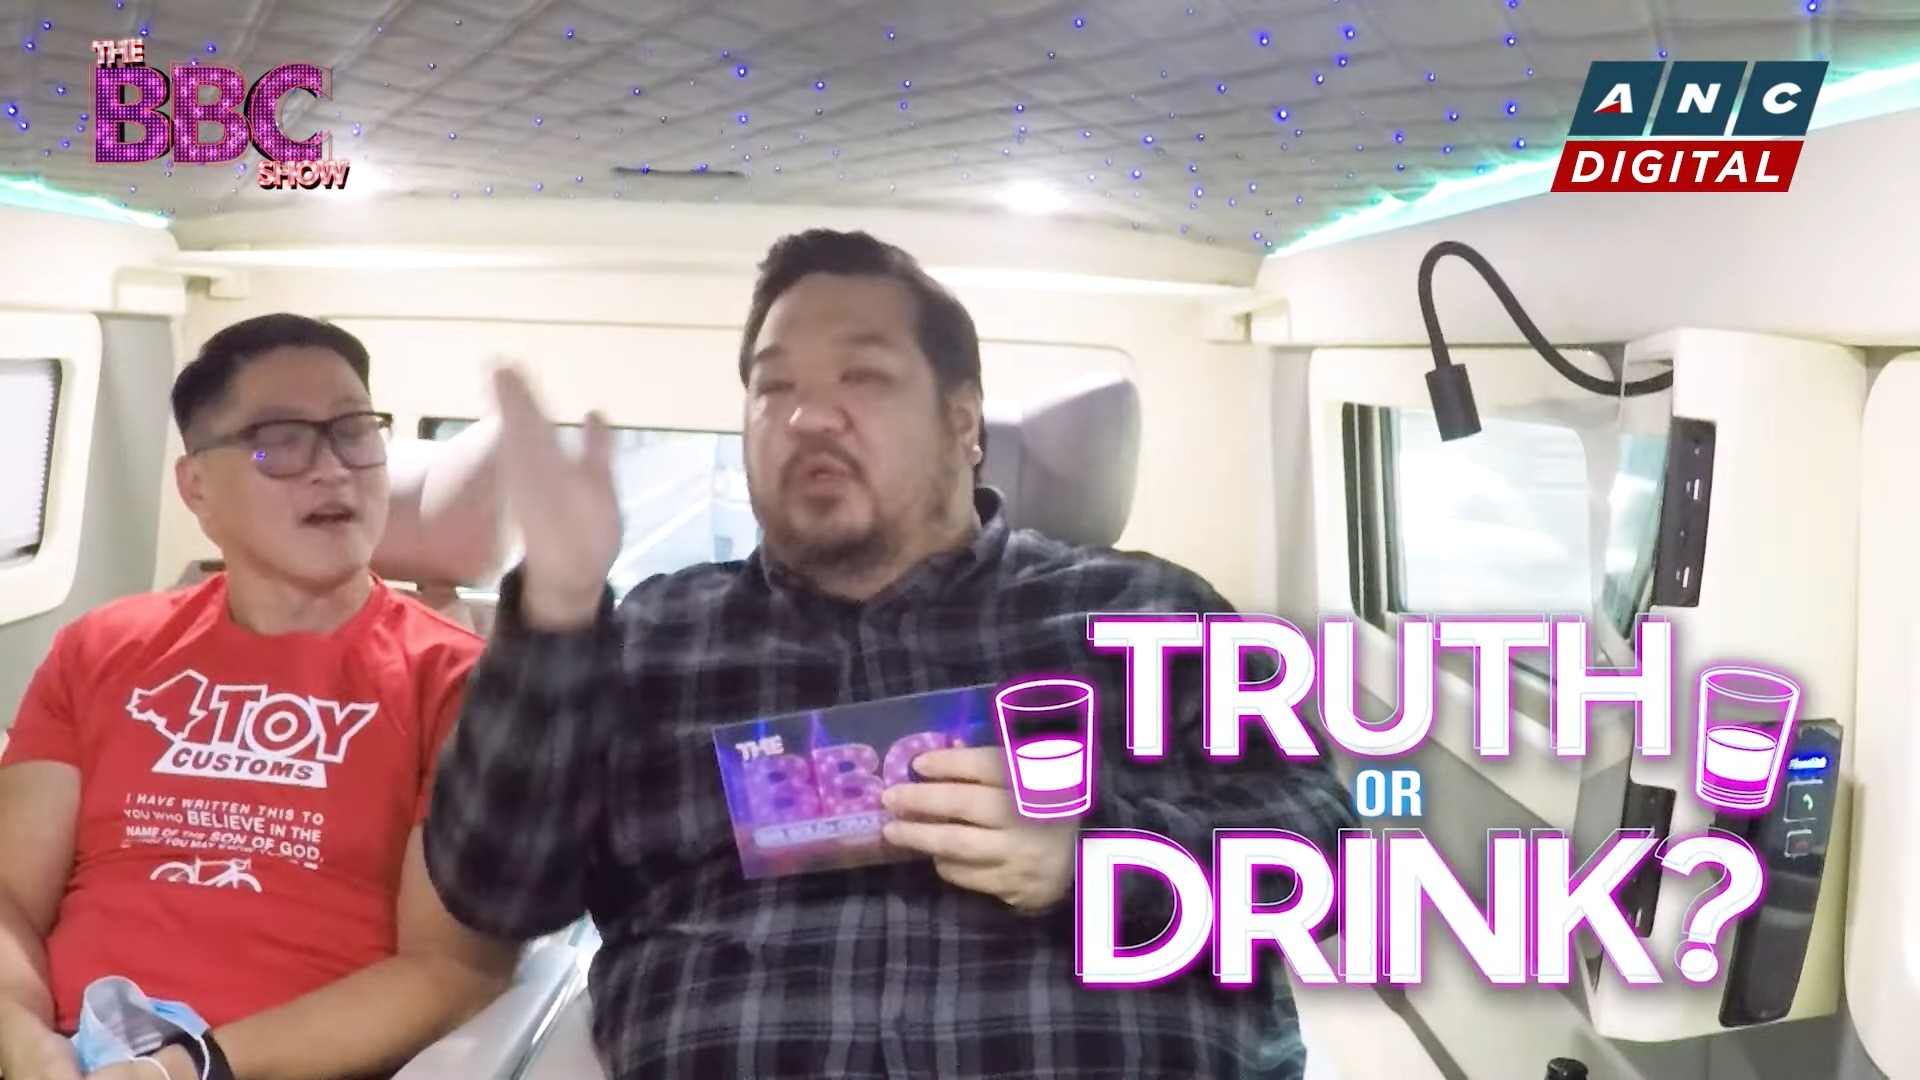 BIG BOY CHENG PLAYS TRUTH OR DRINK WITH ATOY LLAVE